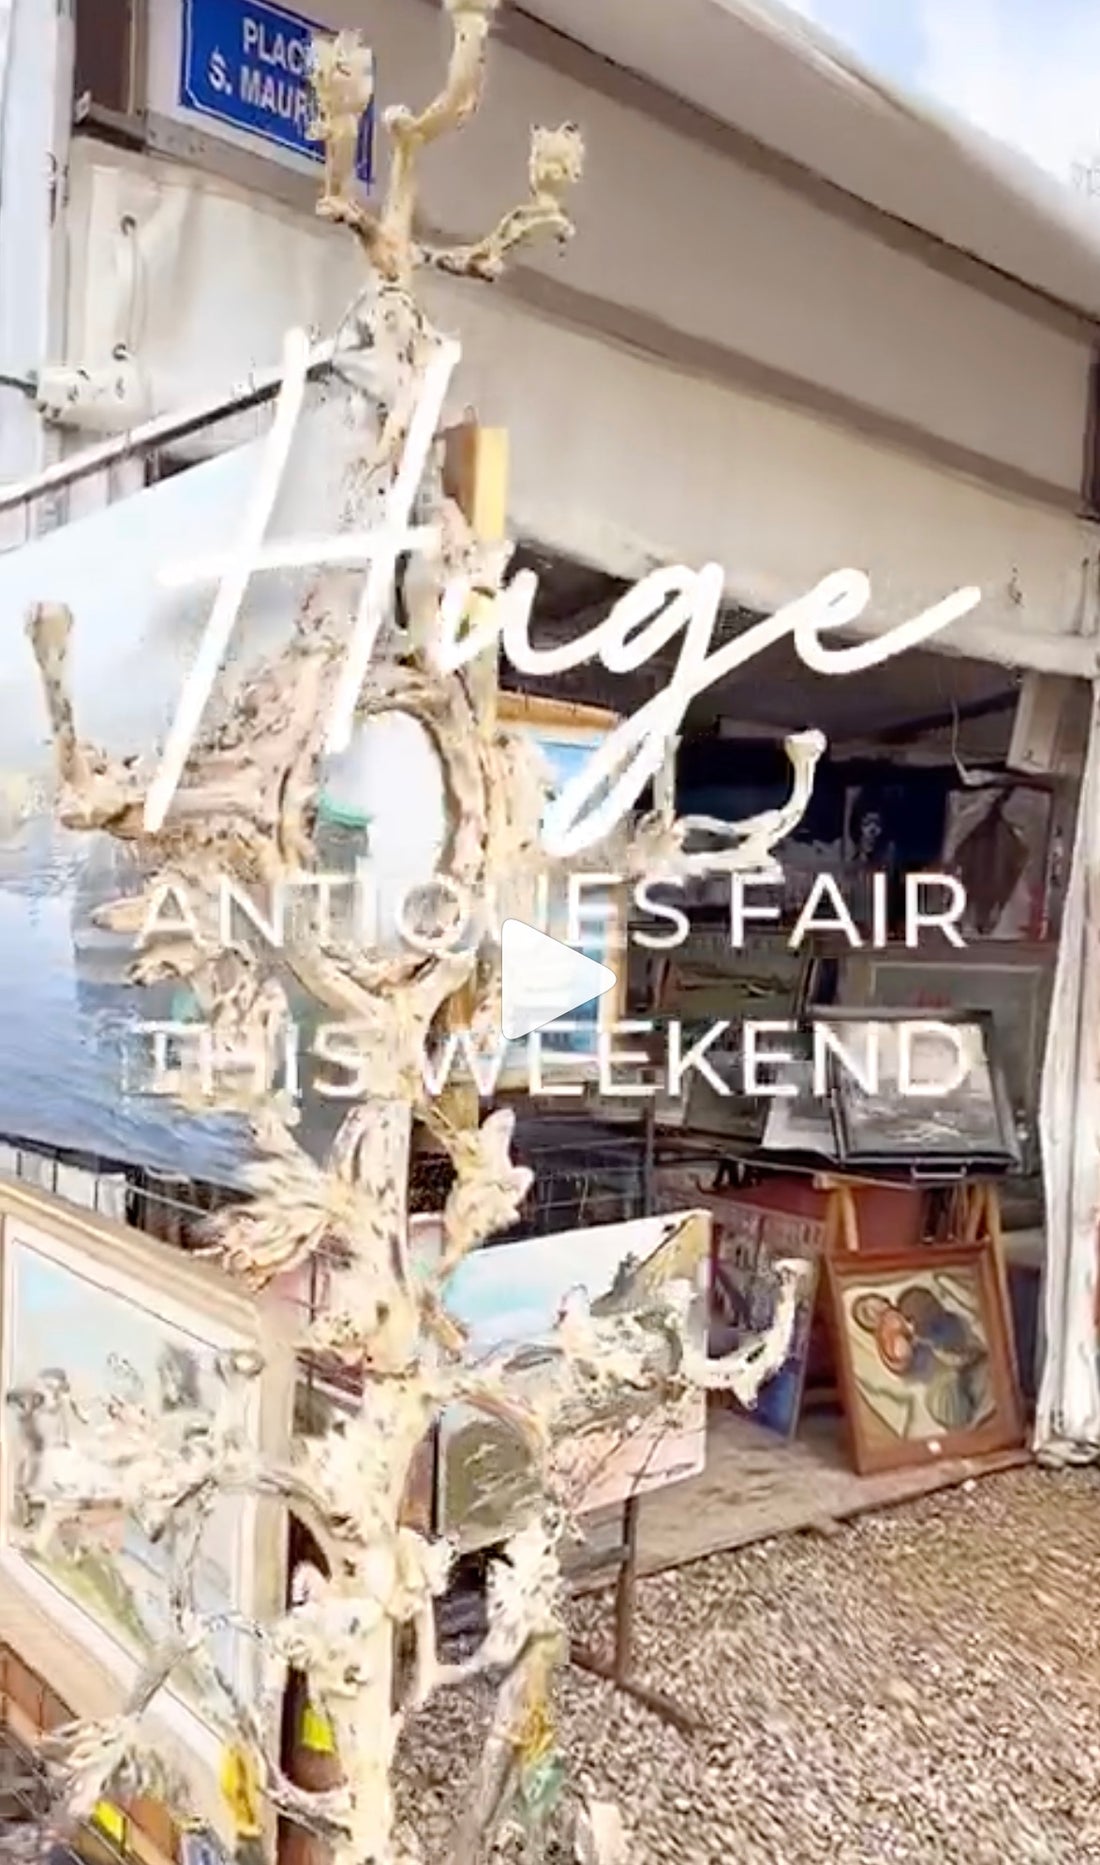 Is this the biggest brocante fair in France?